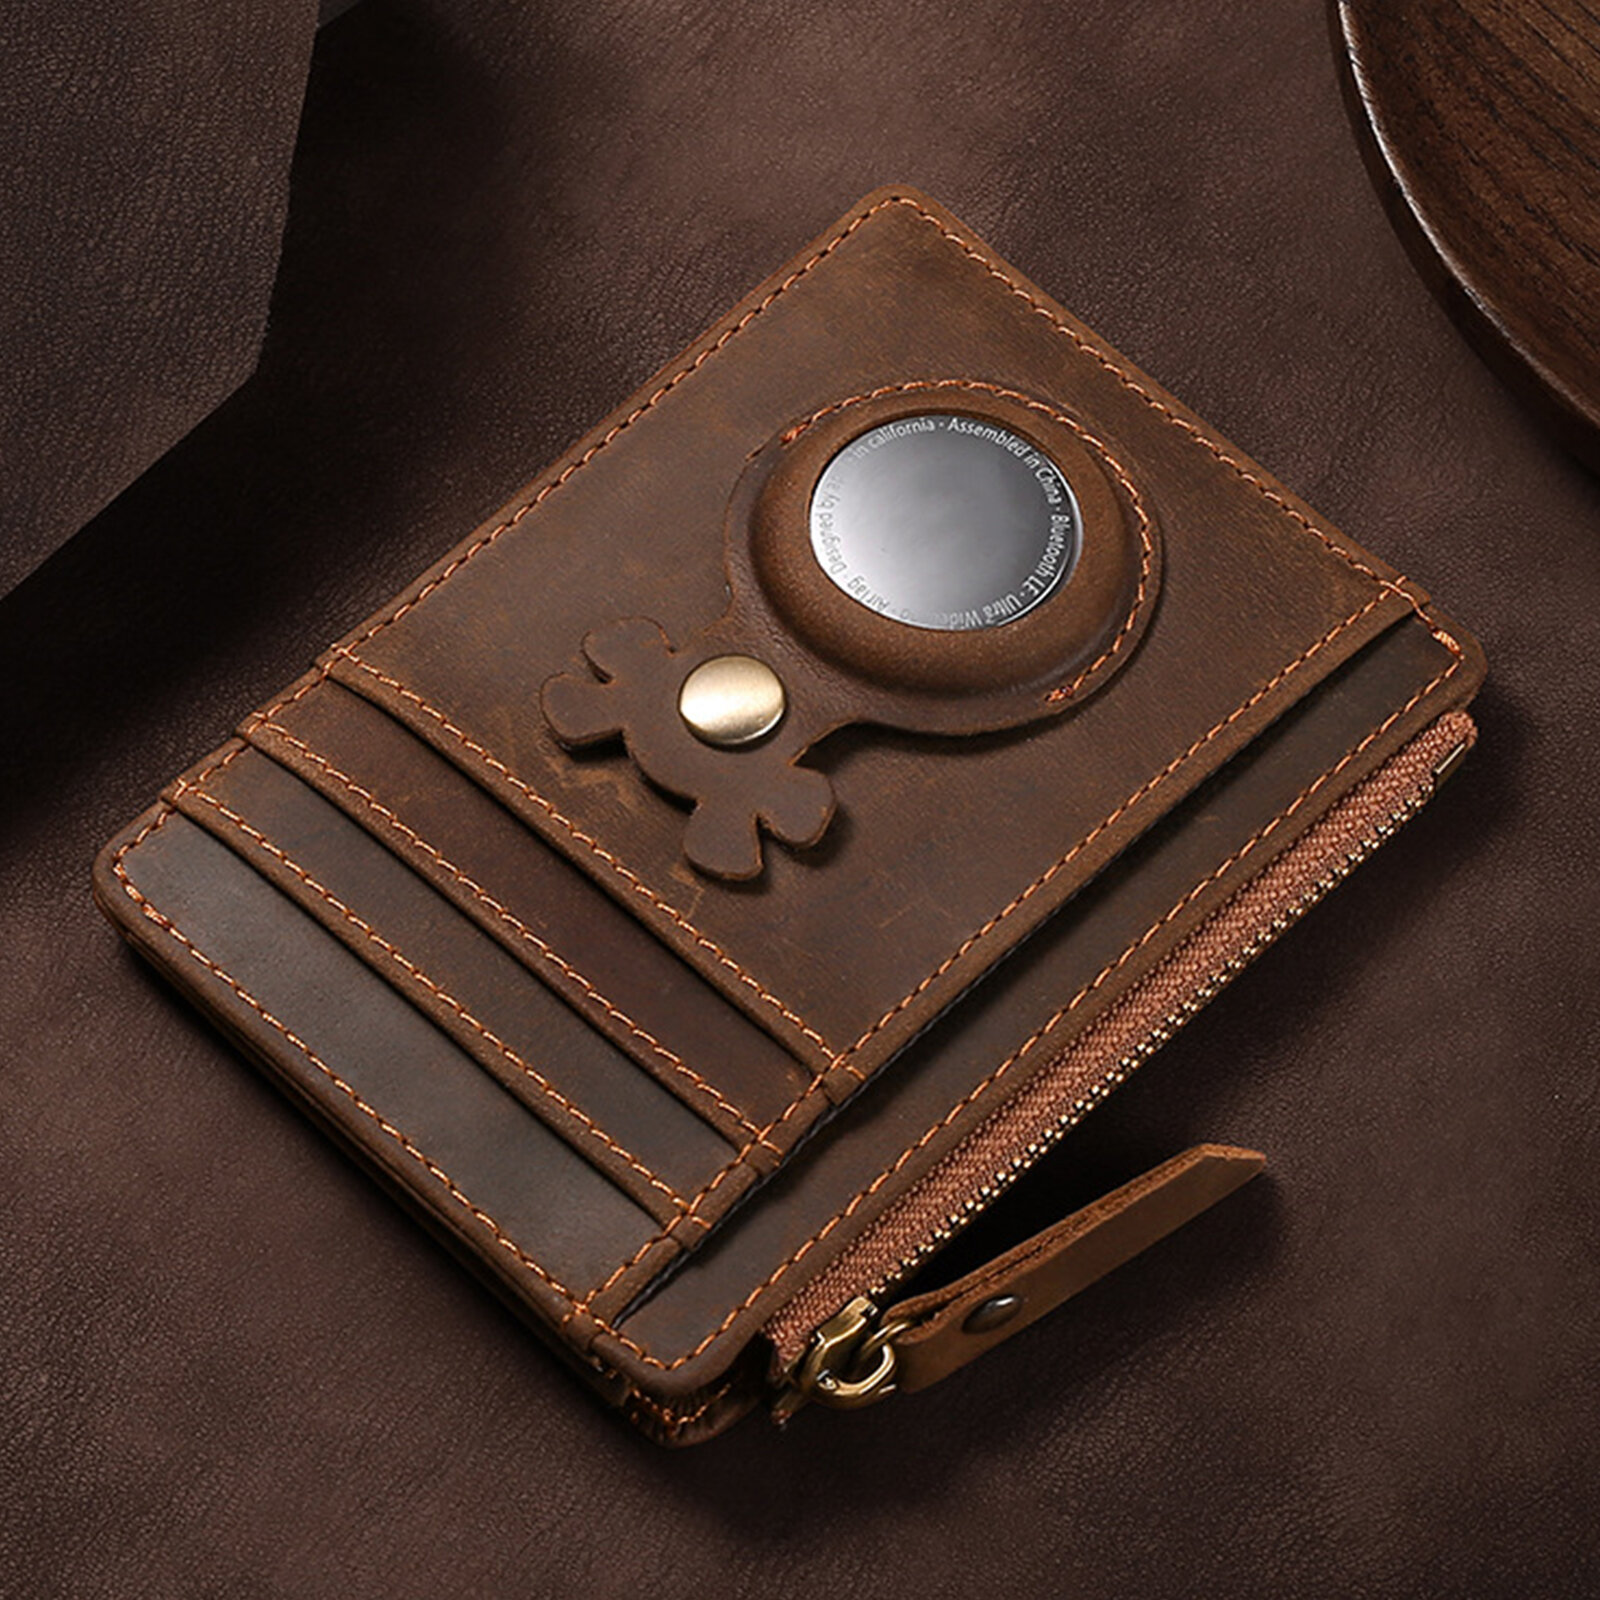 Menico Men Genuine Leather Air Bag Positioning Coin Purse Multiple Card Slots Document Storage Walle